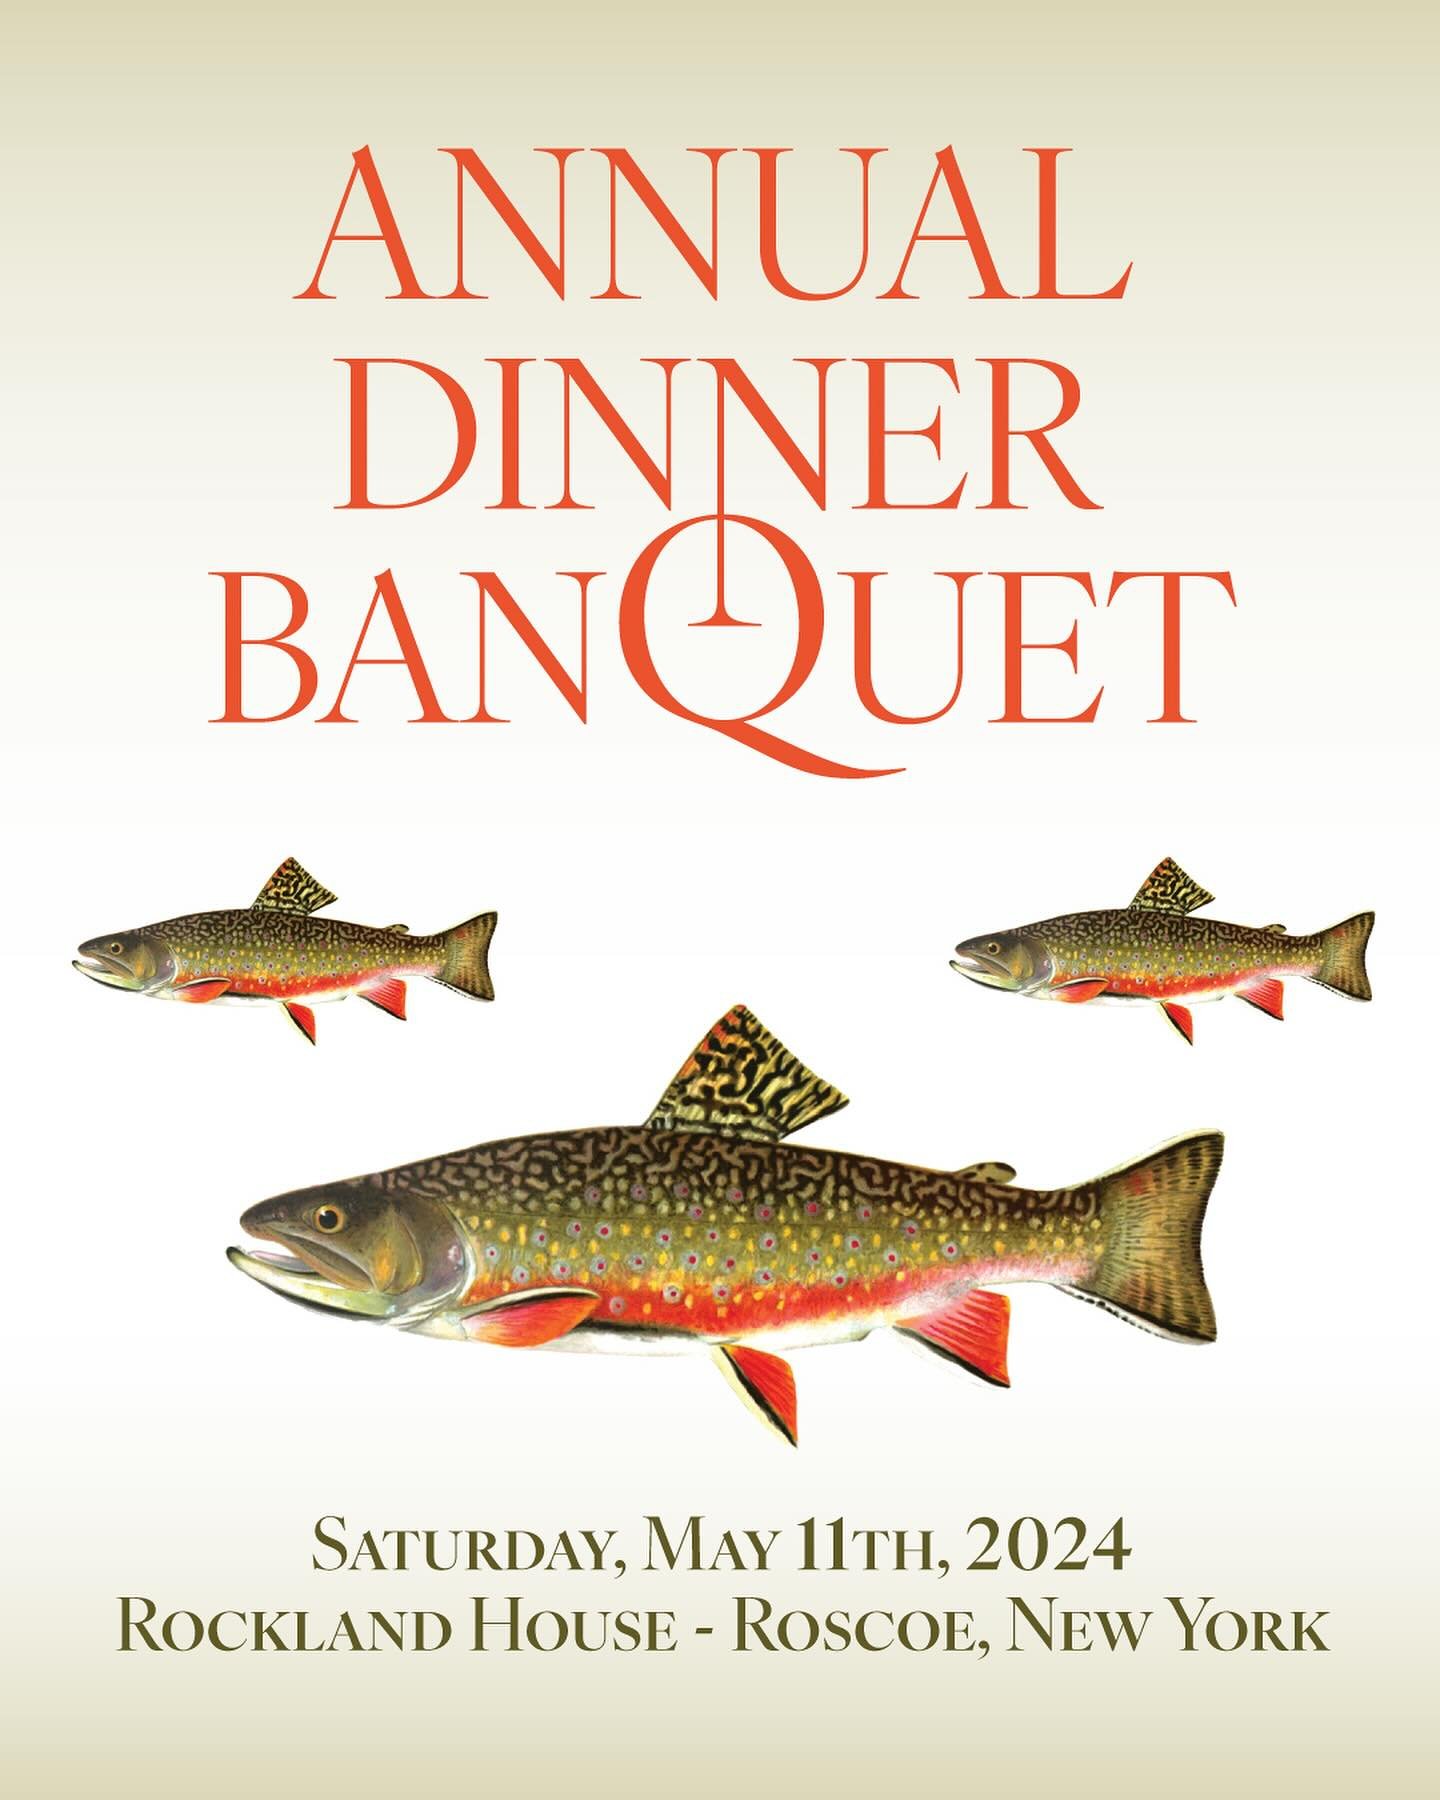 Join us Saturday, May 11th, 5:30-9:30 at the Rockland House in Roscoe, NY for The 2024 Catskill Fly Fishing Center and Museum&rsquo;s Annual Dinner. Honoring this year&rsquo;s Catskill Legends:John Bonasera, Per Brandin, and John Shaner. Tickets are 